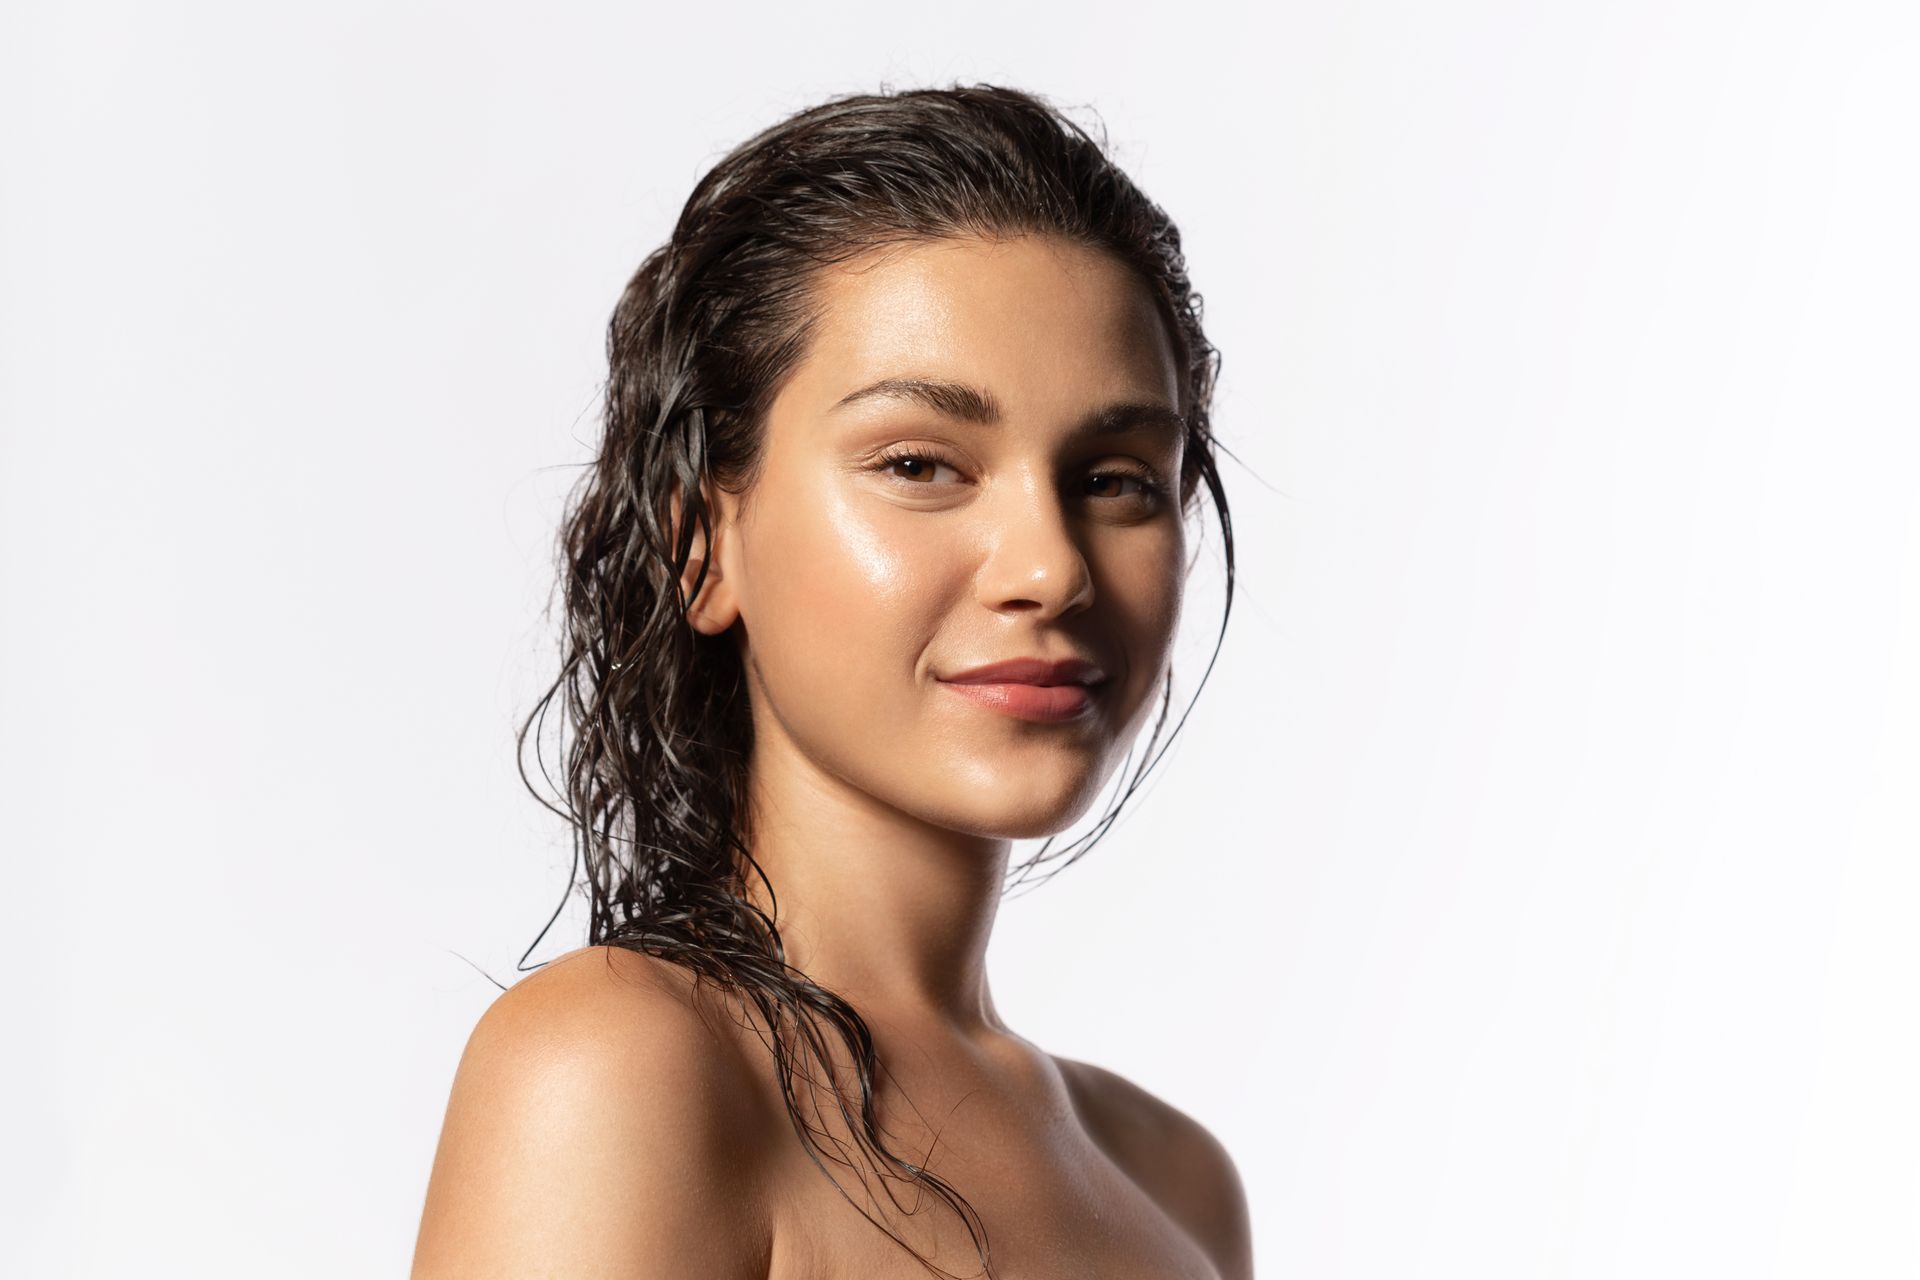 a close up of a woman 's face with wet hair on a white background .